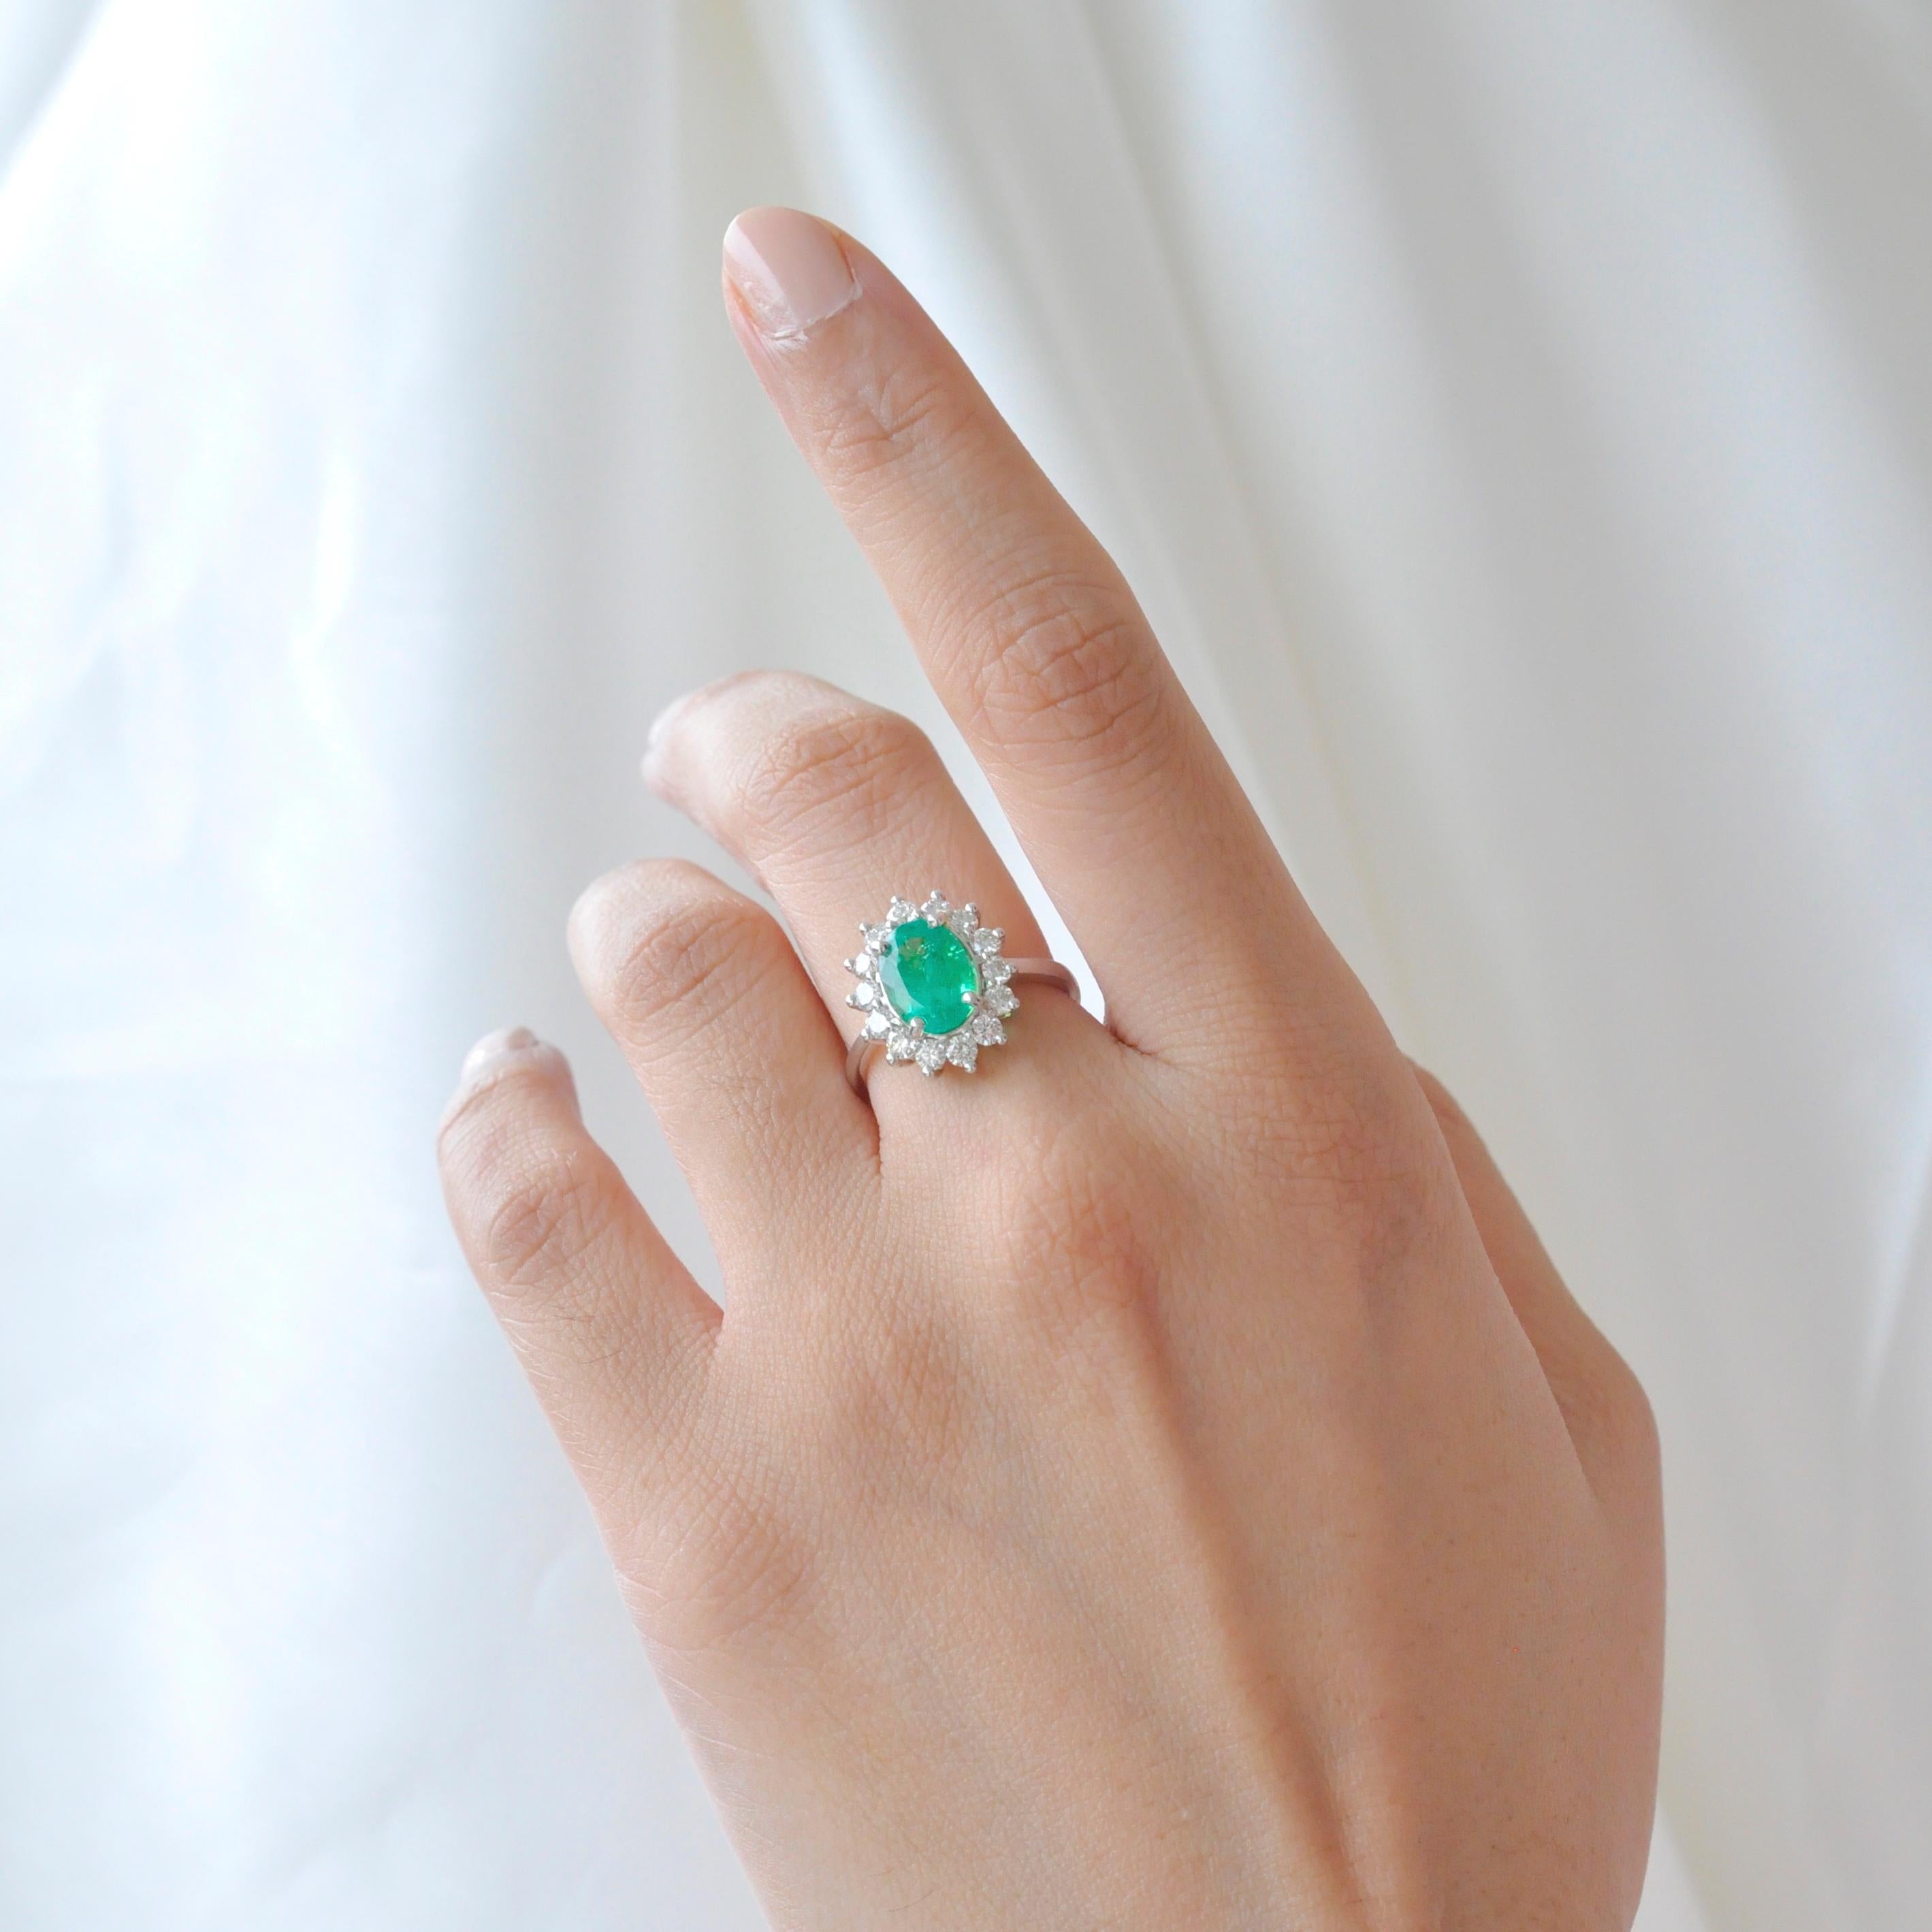 18 karat white gold certified oval colombian emerald diamond engagement ring.

As magnificent as it can be, this is the oval colombian (certified) emerald diamond engagement ring. The lustrous natural green colombian emerald measuring 10 X 7.5 mm